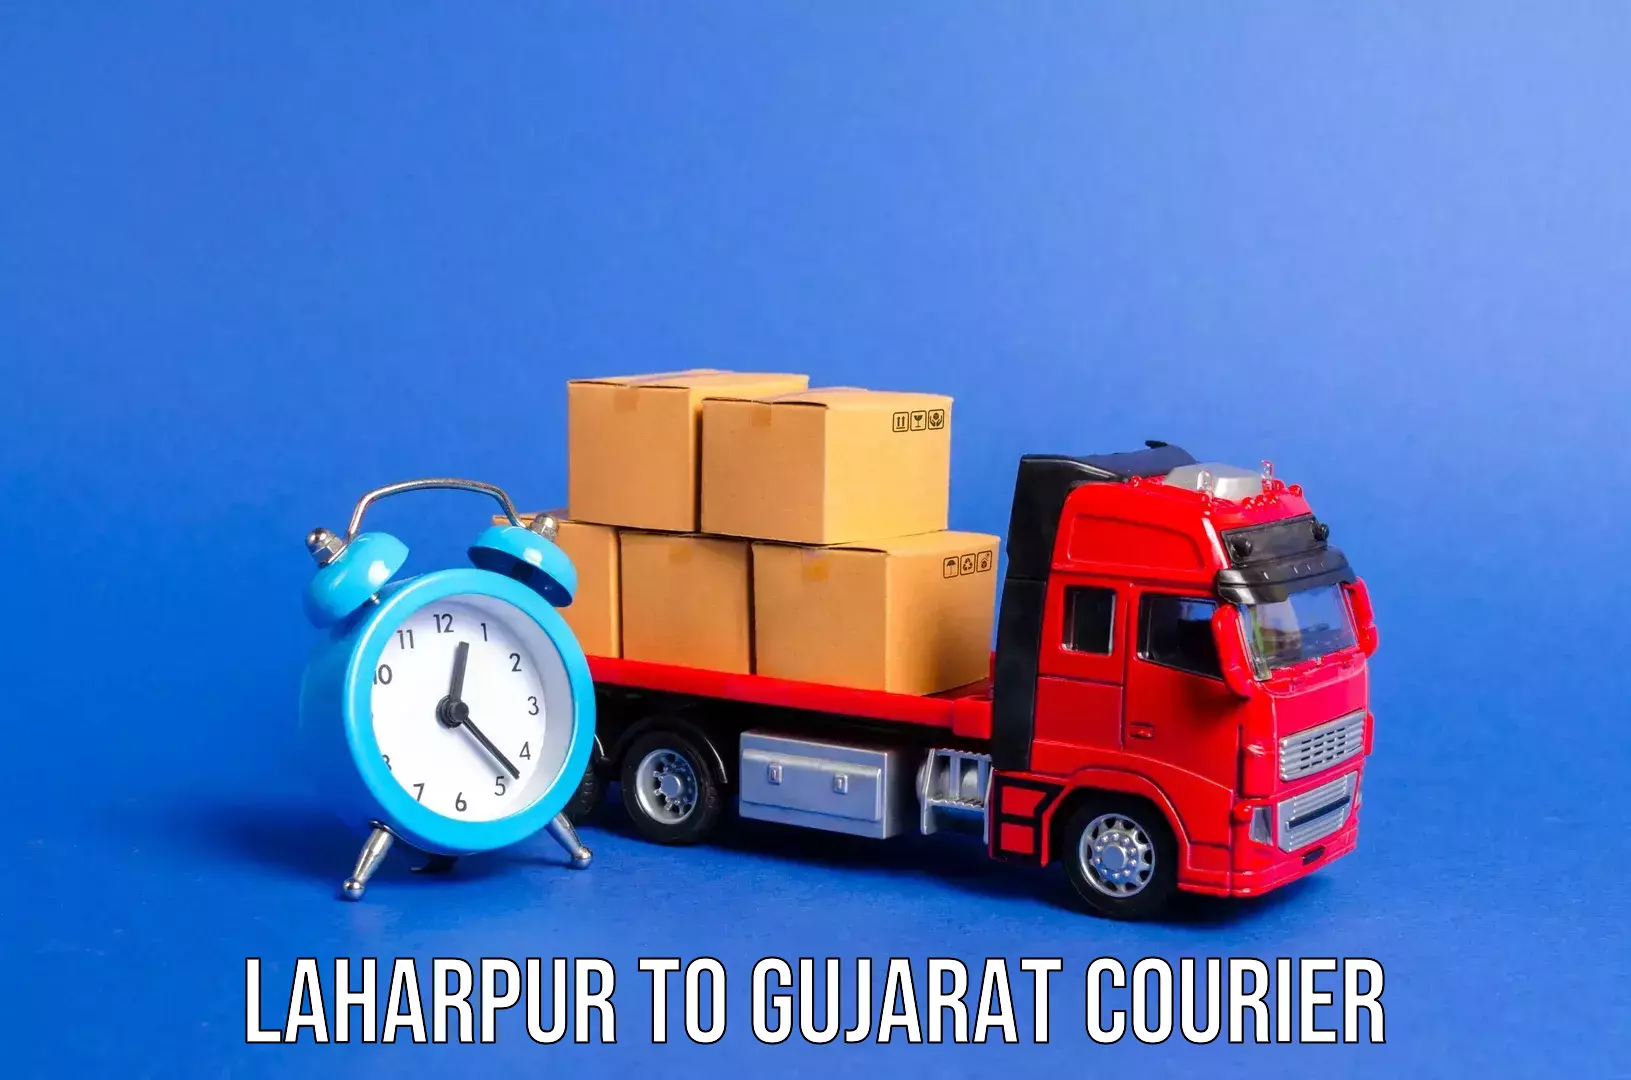 Baggage transport innovation Laharpur to Anand Agricultural University